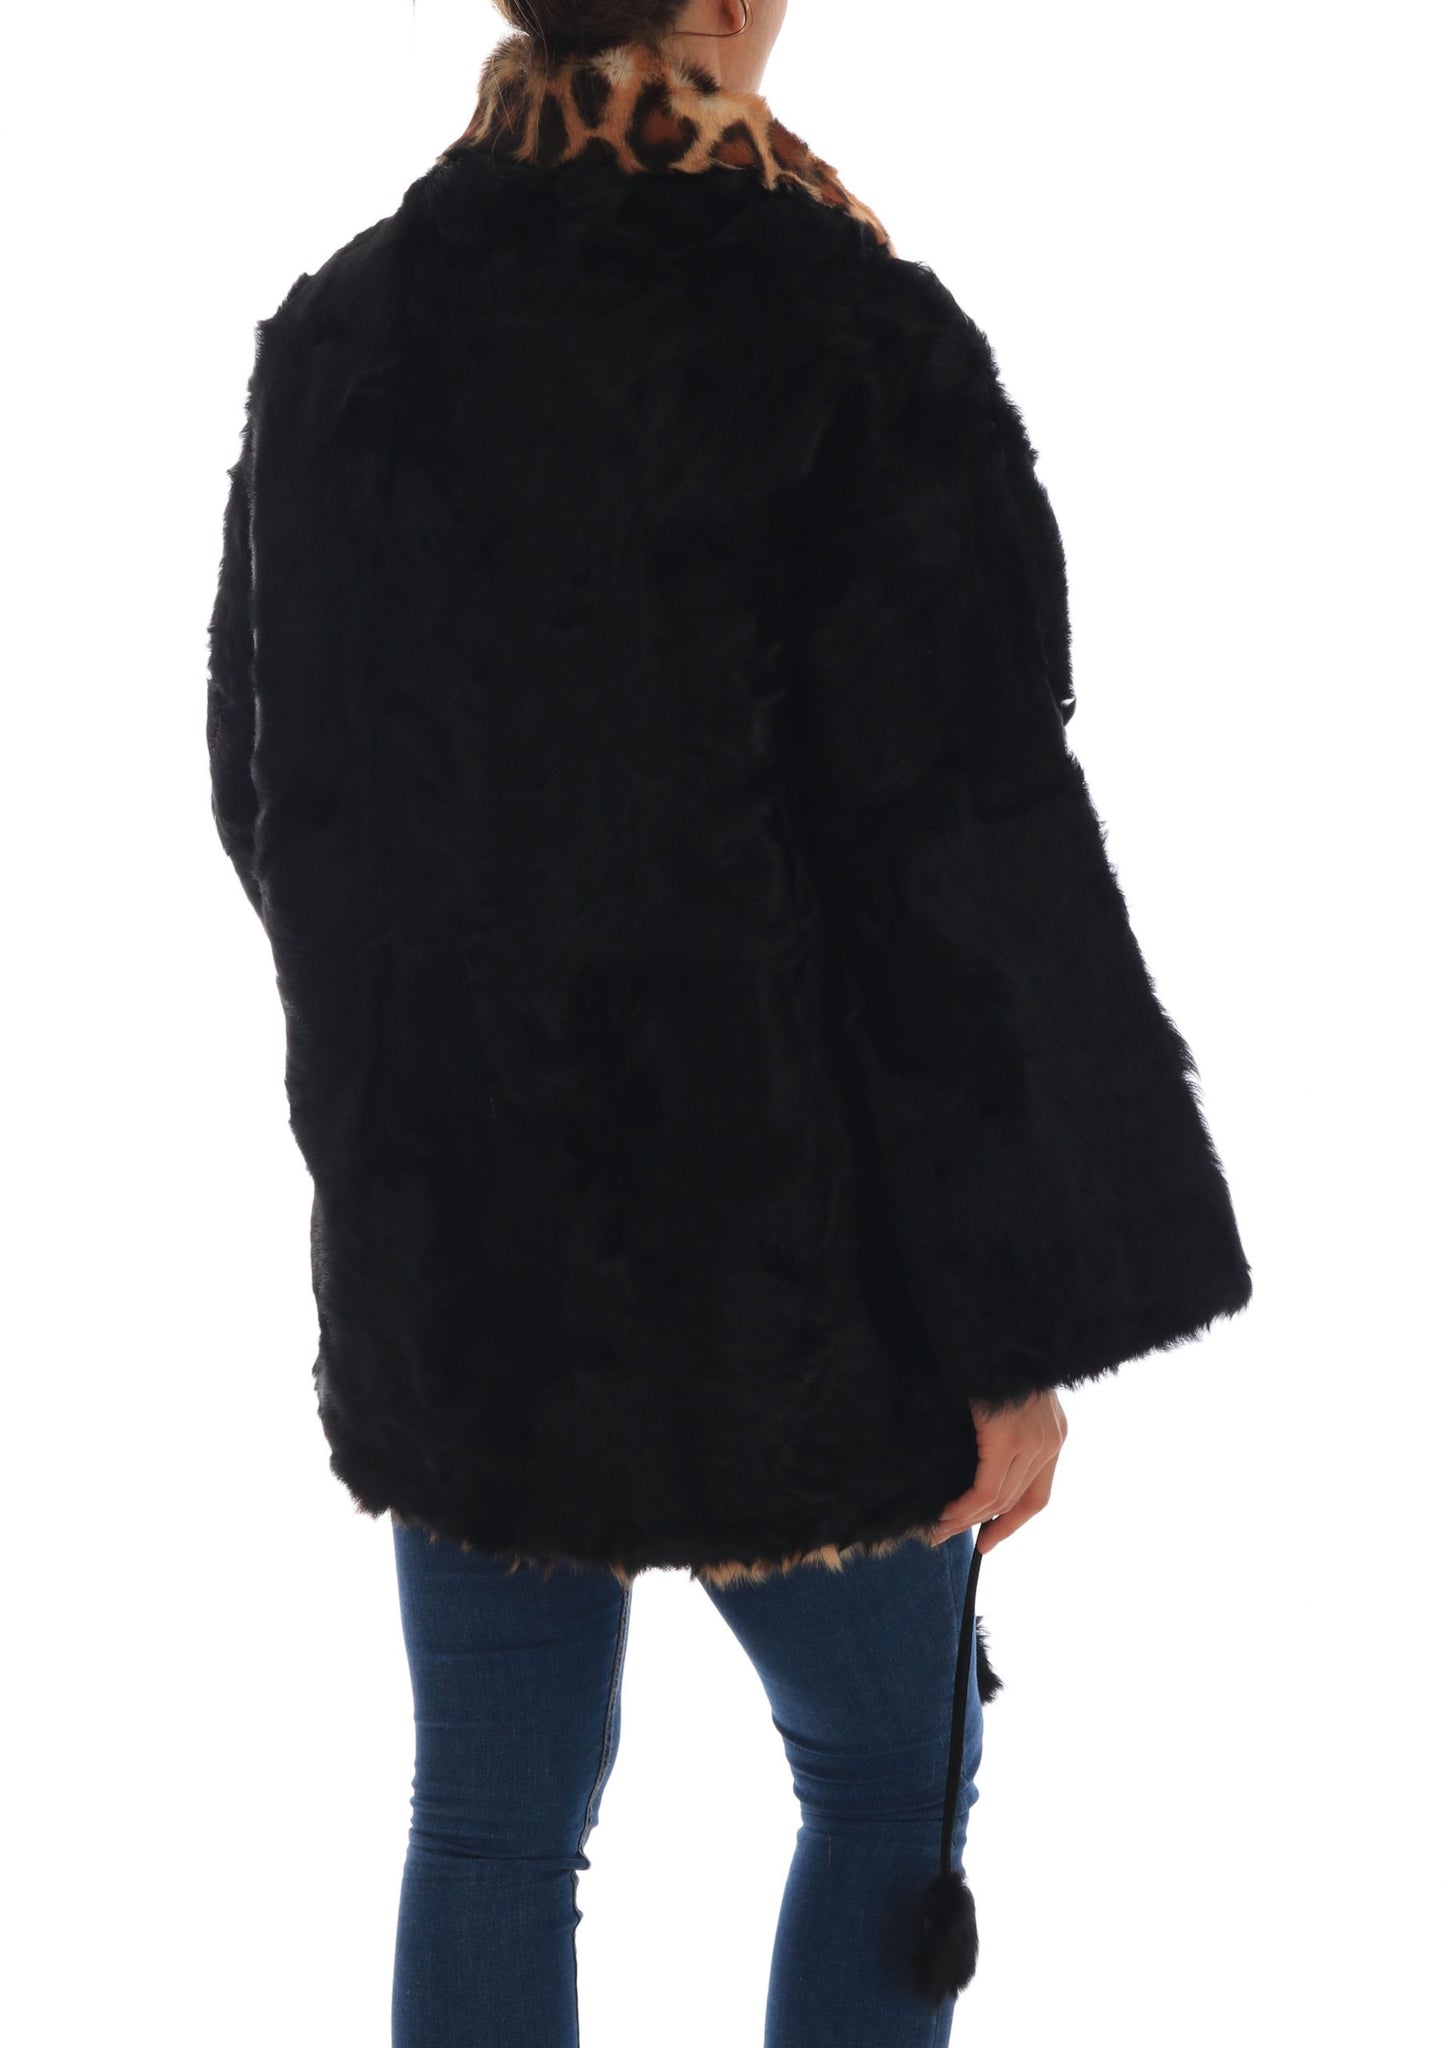 Black Lamb Leopard Print Fur Coat Jacket - Designed by Dolce & Gabbana Available to Buy at a Discounted Price on Moon Behind The Hill Online Designer Discount Store